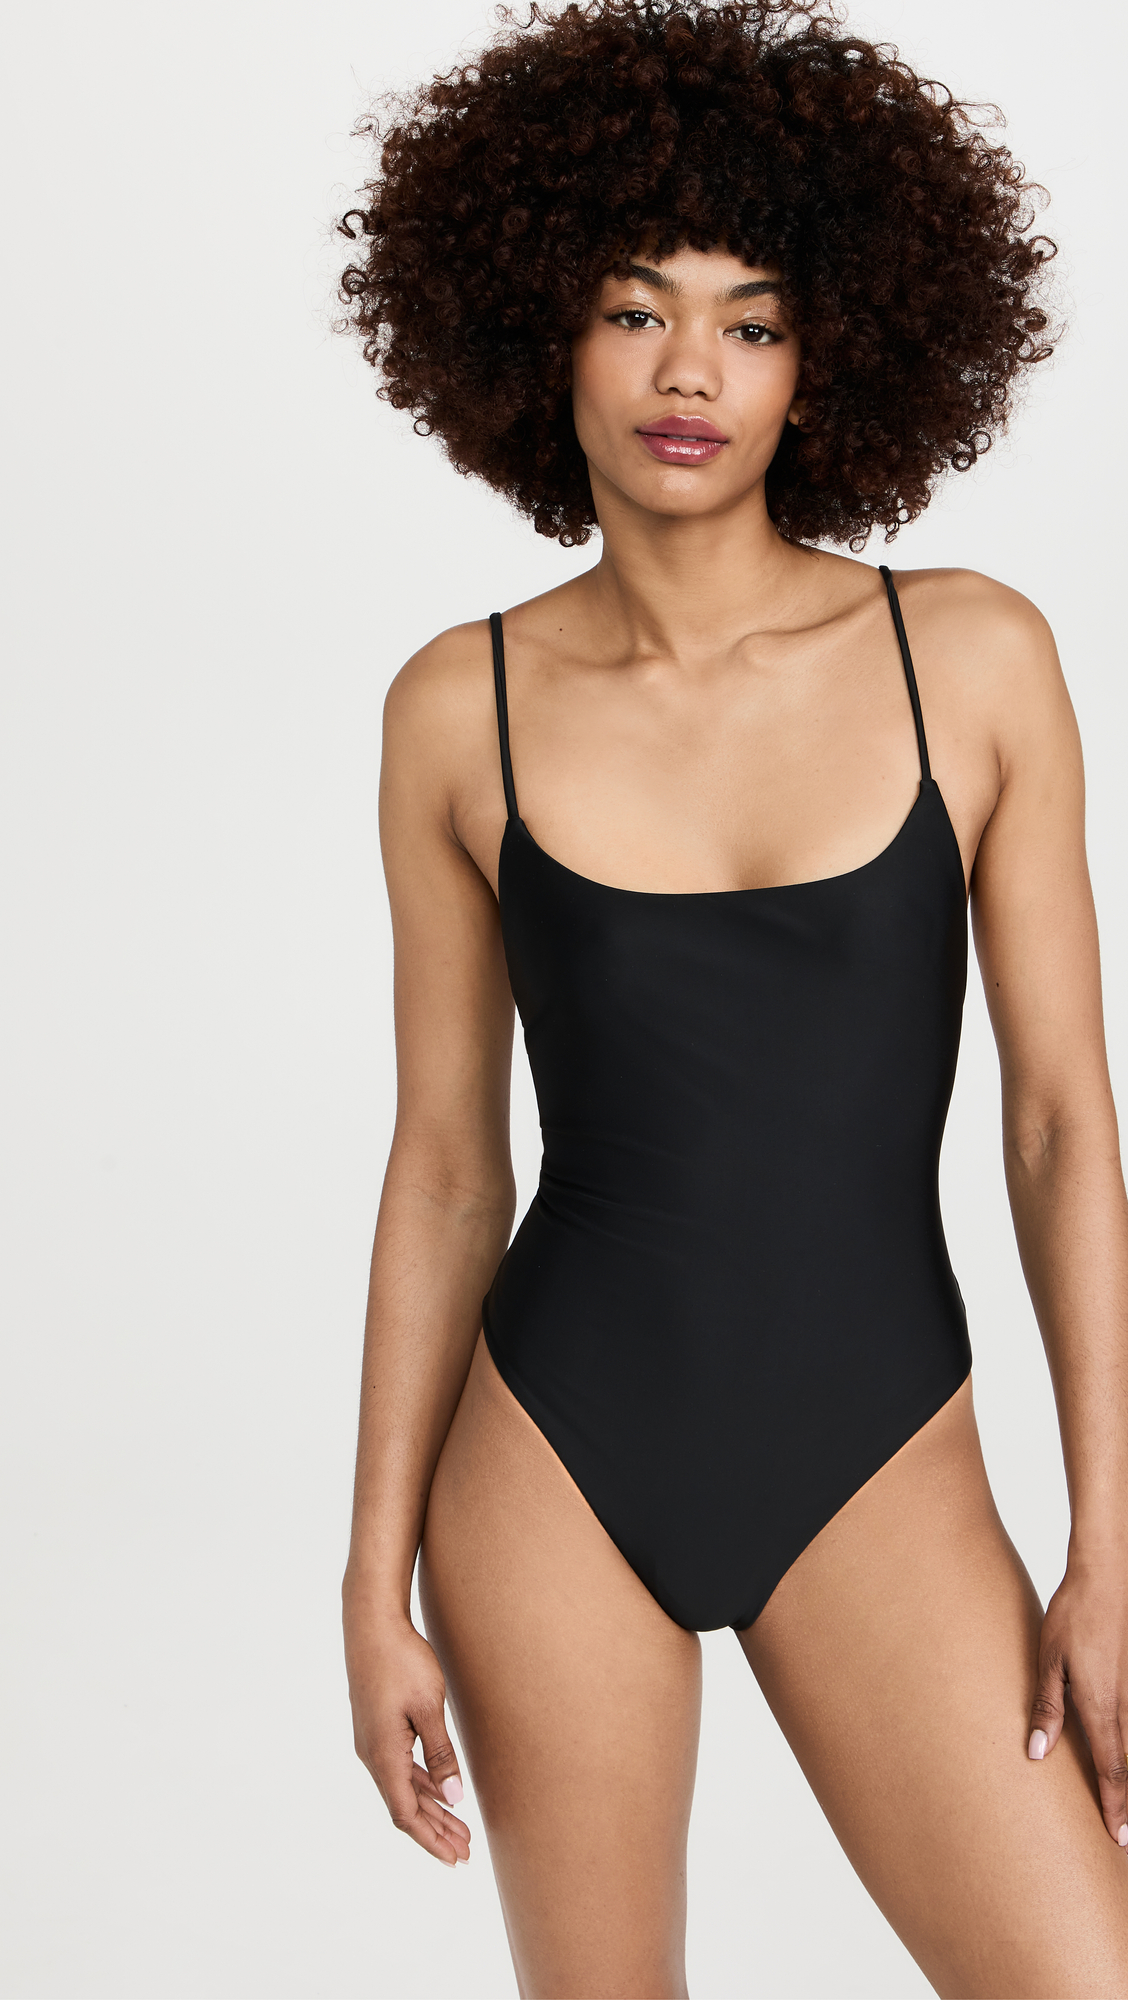 Madewell Second Wave Spaghetti Strap One-Piece Swimsuit